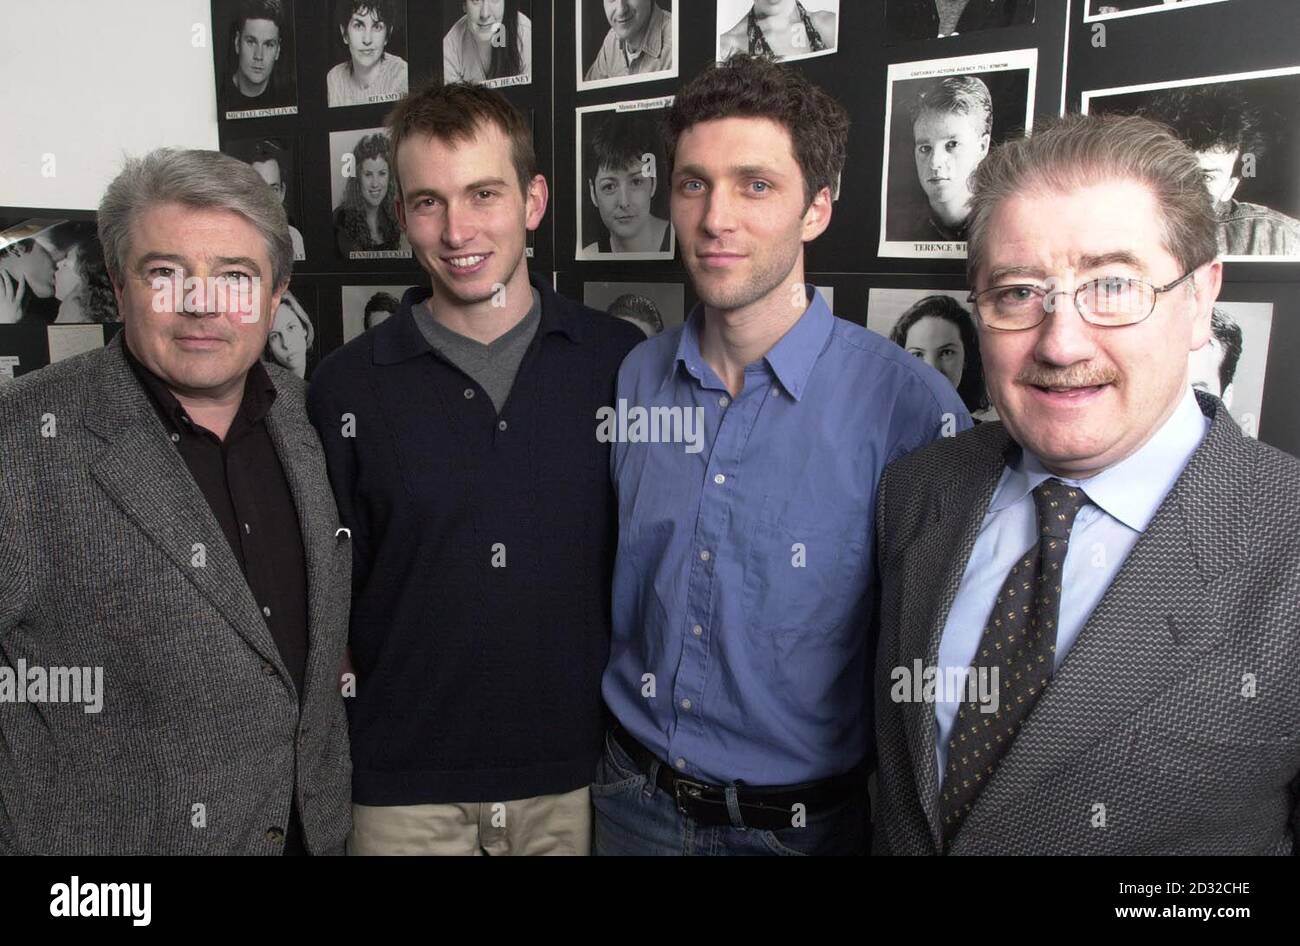 John McColgan (left), Director of Abhann Productions, Riverdance Scholarship winners Conrad Kemp (second left) from Johannesburg and Rose Roberts from Dublin and Joe Dowling, (right) Chairman of The Gaiety School of Acting at the Gaiety School of acting.  *   in Dublin after the award was announced. The scholarship is presented each year to a first year student following an interview by a panel of judges. The award covers tuition fees for one year. This year the award was split between the two winners who were descibed as 'first rate students'. The school was founded in 1986 by Joe Dowling and Stock Photo